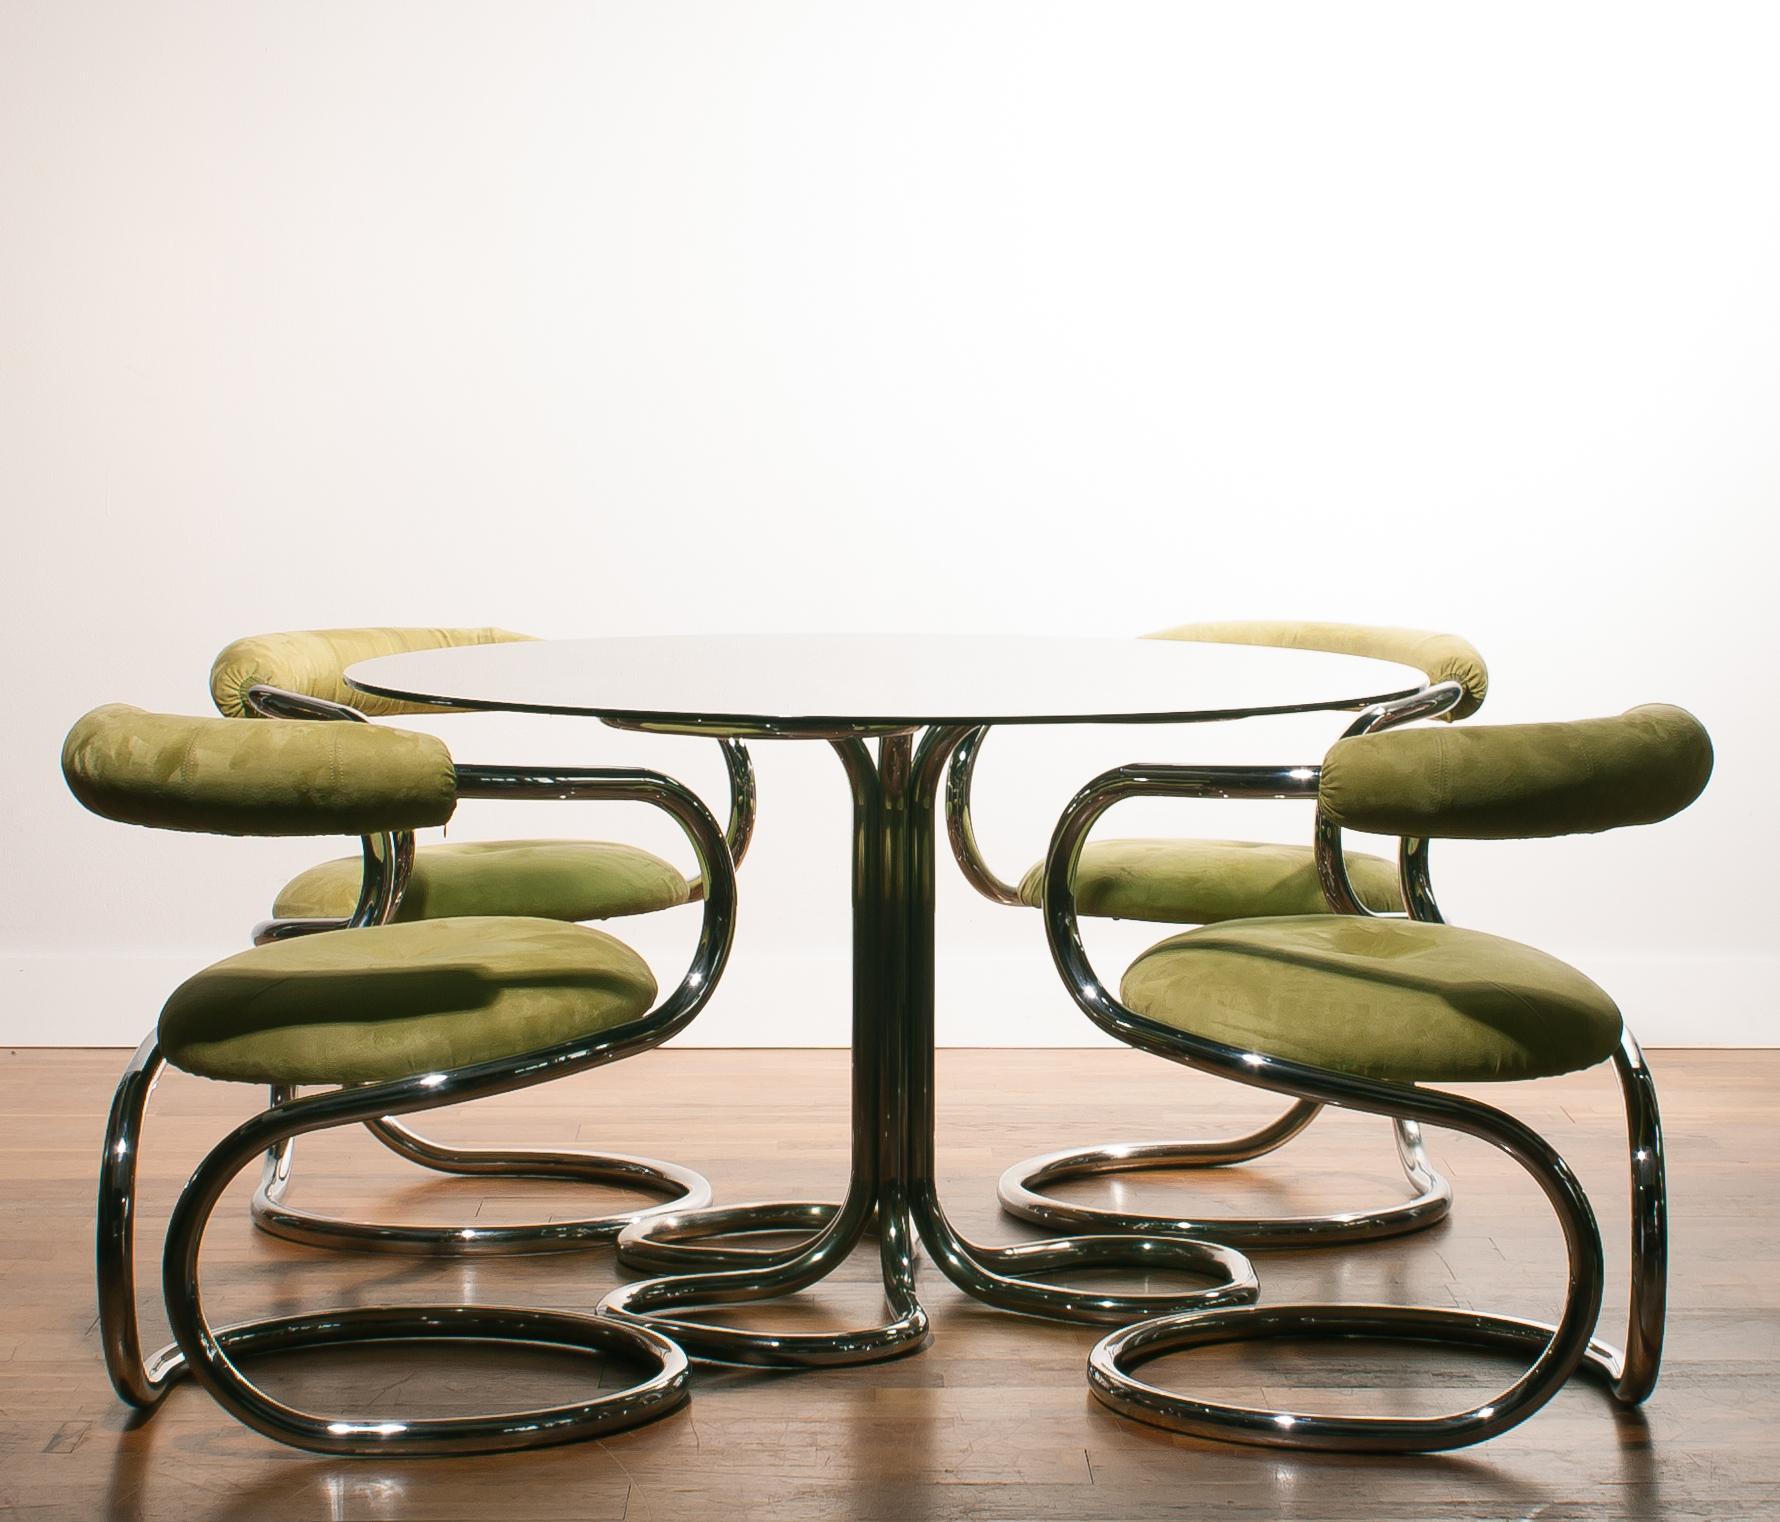 1970s, Chrome Tubular Set of Four Dining Chairs by Tecnosalotto, Italy 1